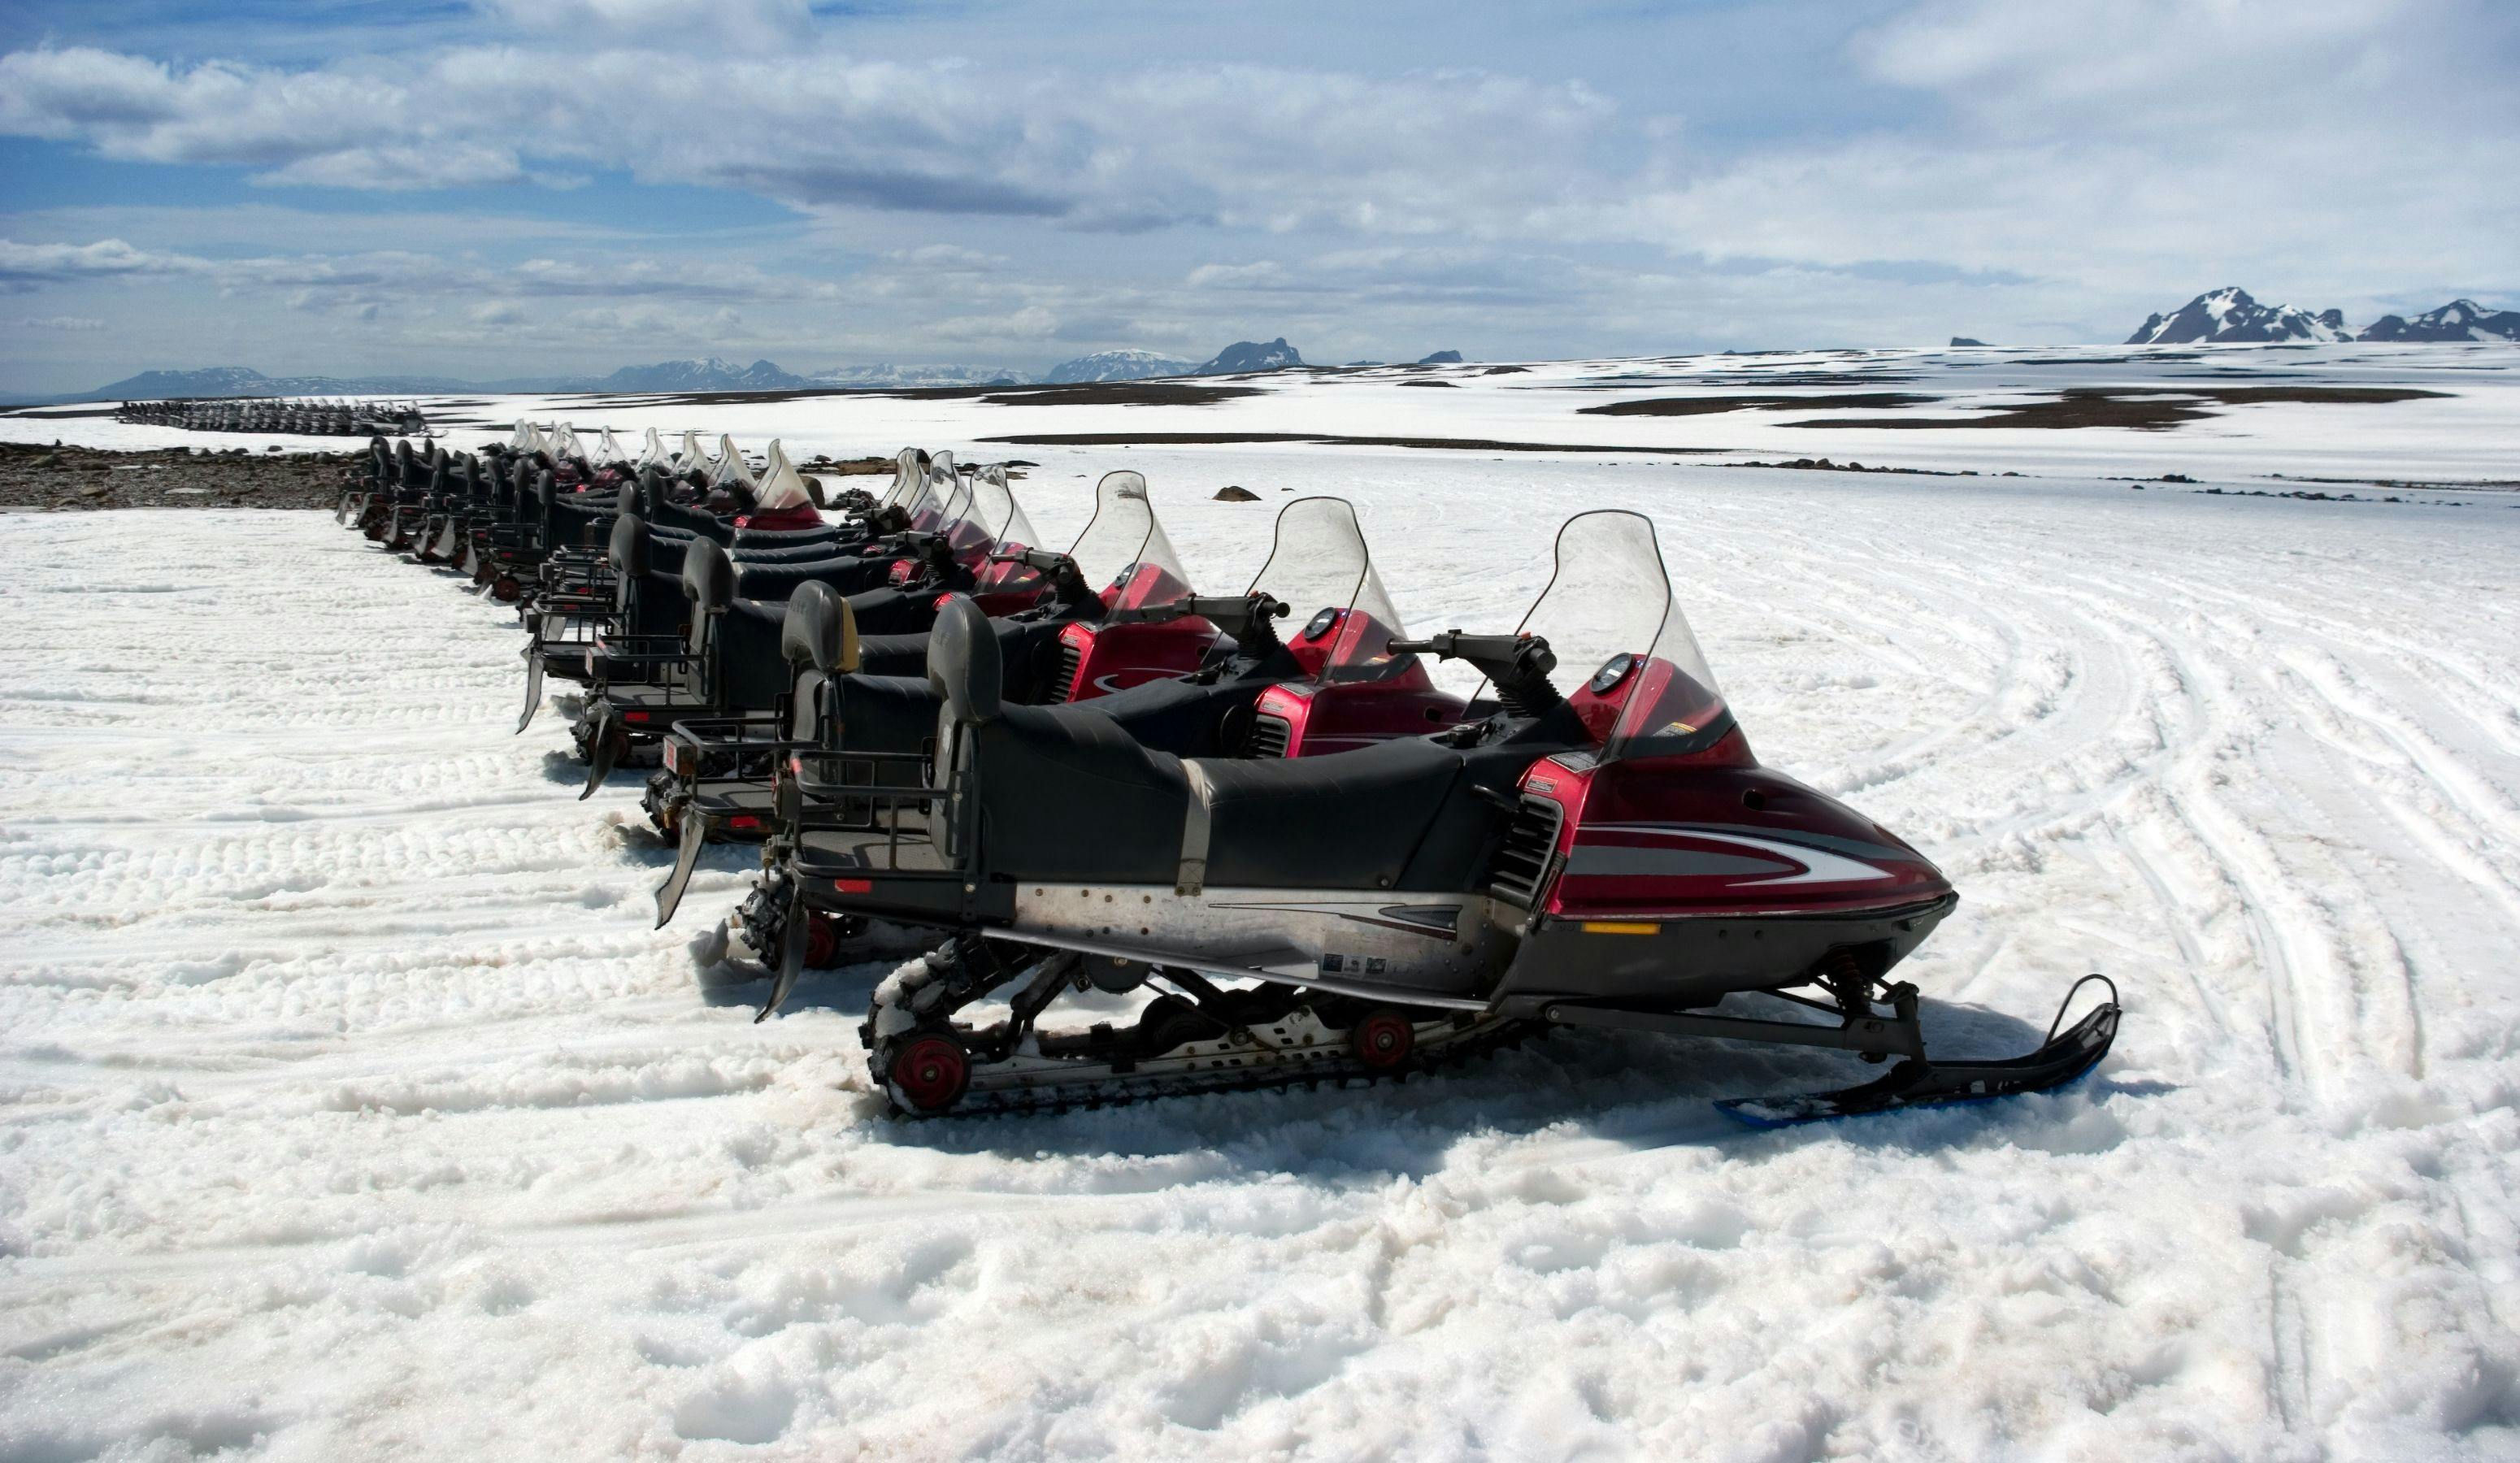 Snowmobiling in Iceland: A Thrilling Arctic Adventure